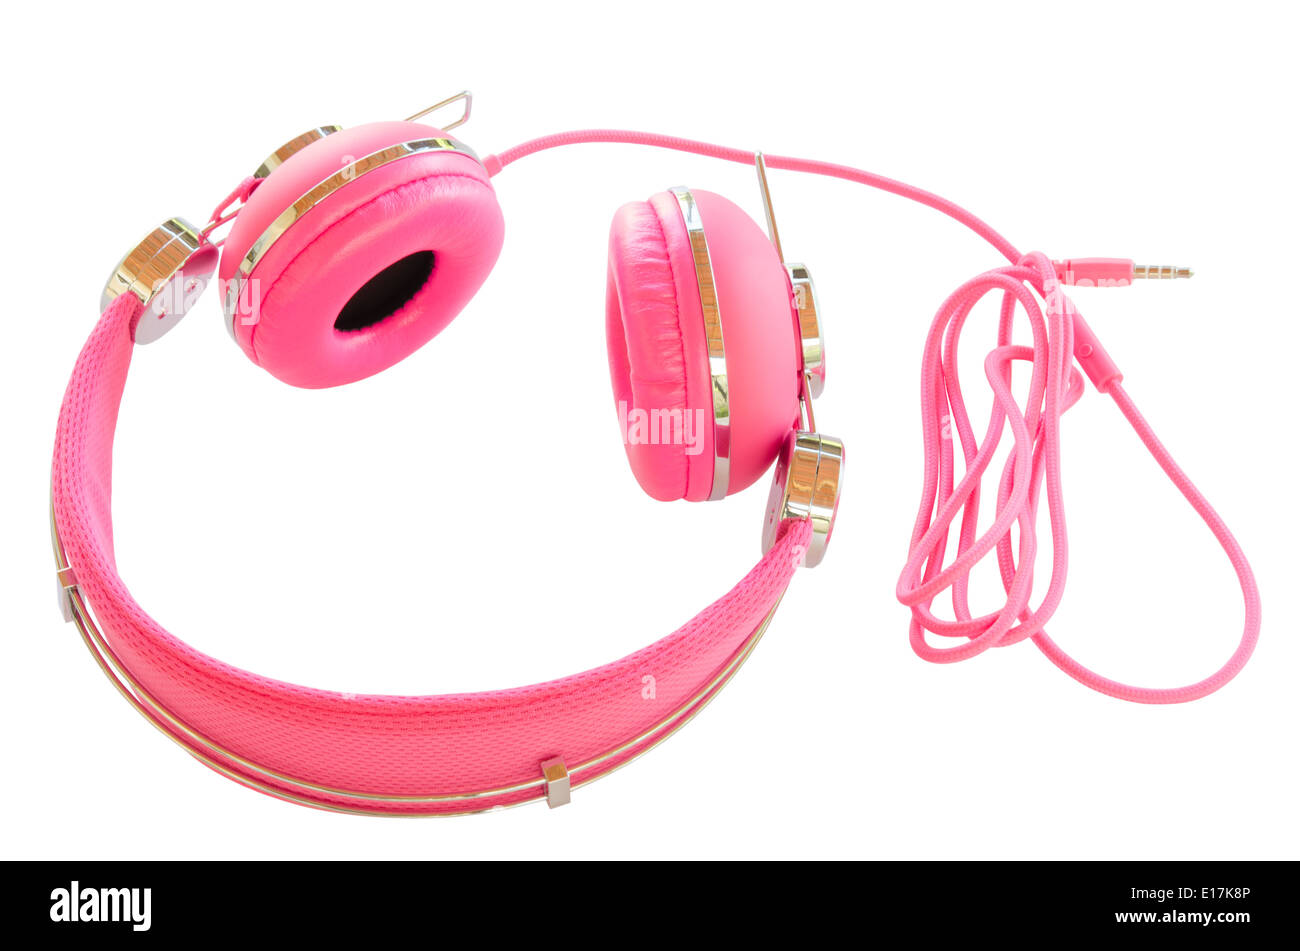 Vivid pink colorful wired headphones isolated on white Stock Photo